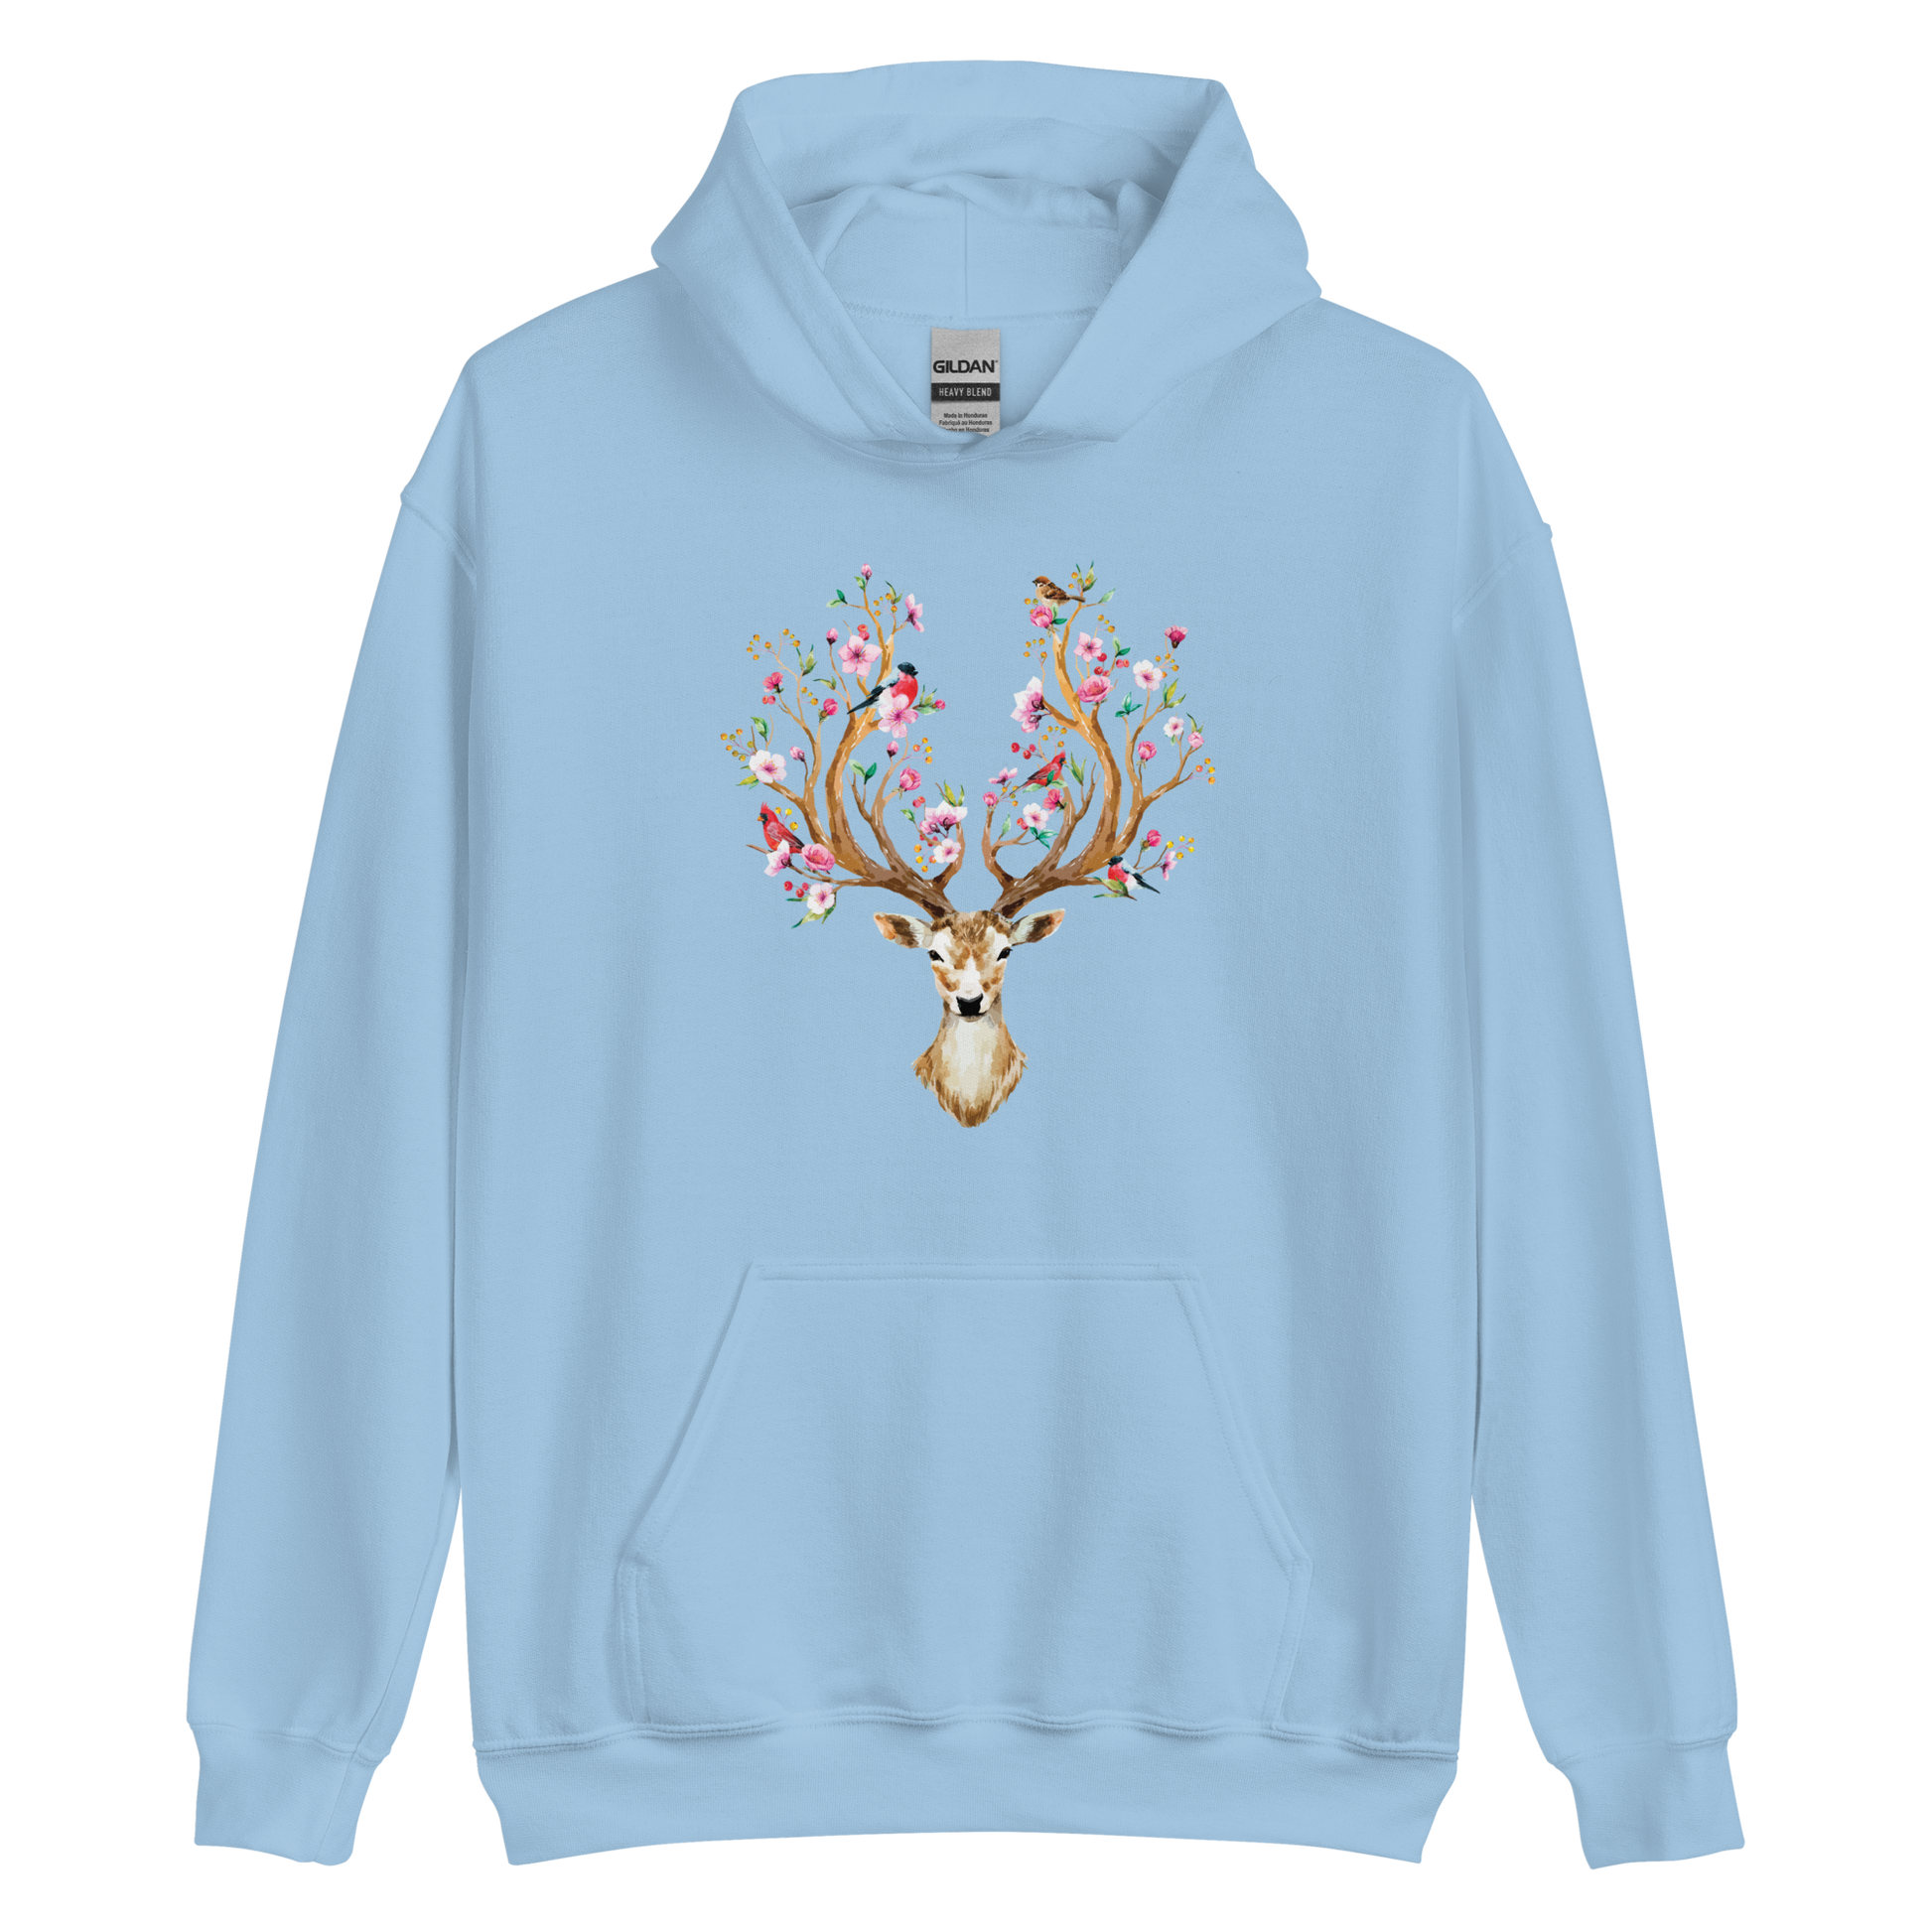 Light Blue Floral Red Deer Hoodie featuring a captivating Floral Red Deer graphic on the chest - Cute Graphic Deer Hoodies - Boozy Fox